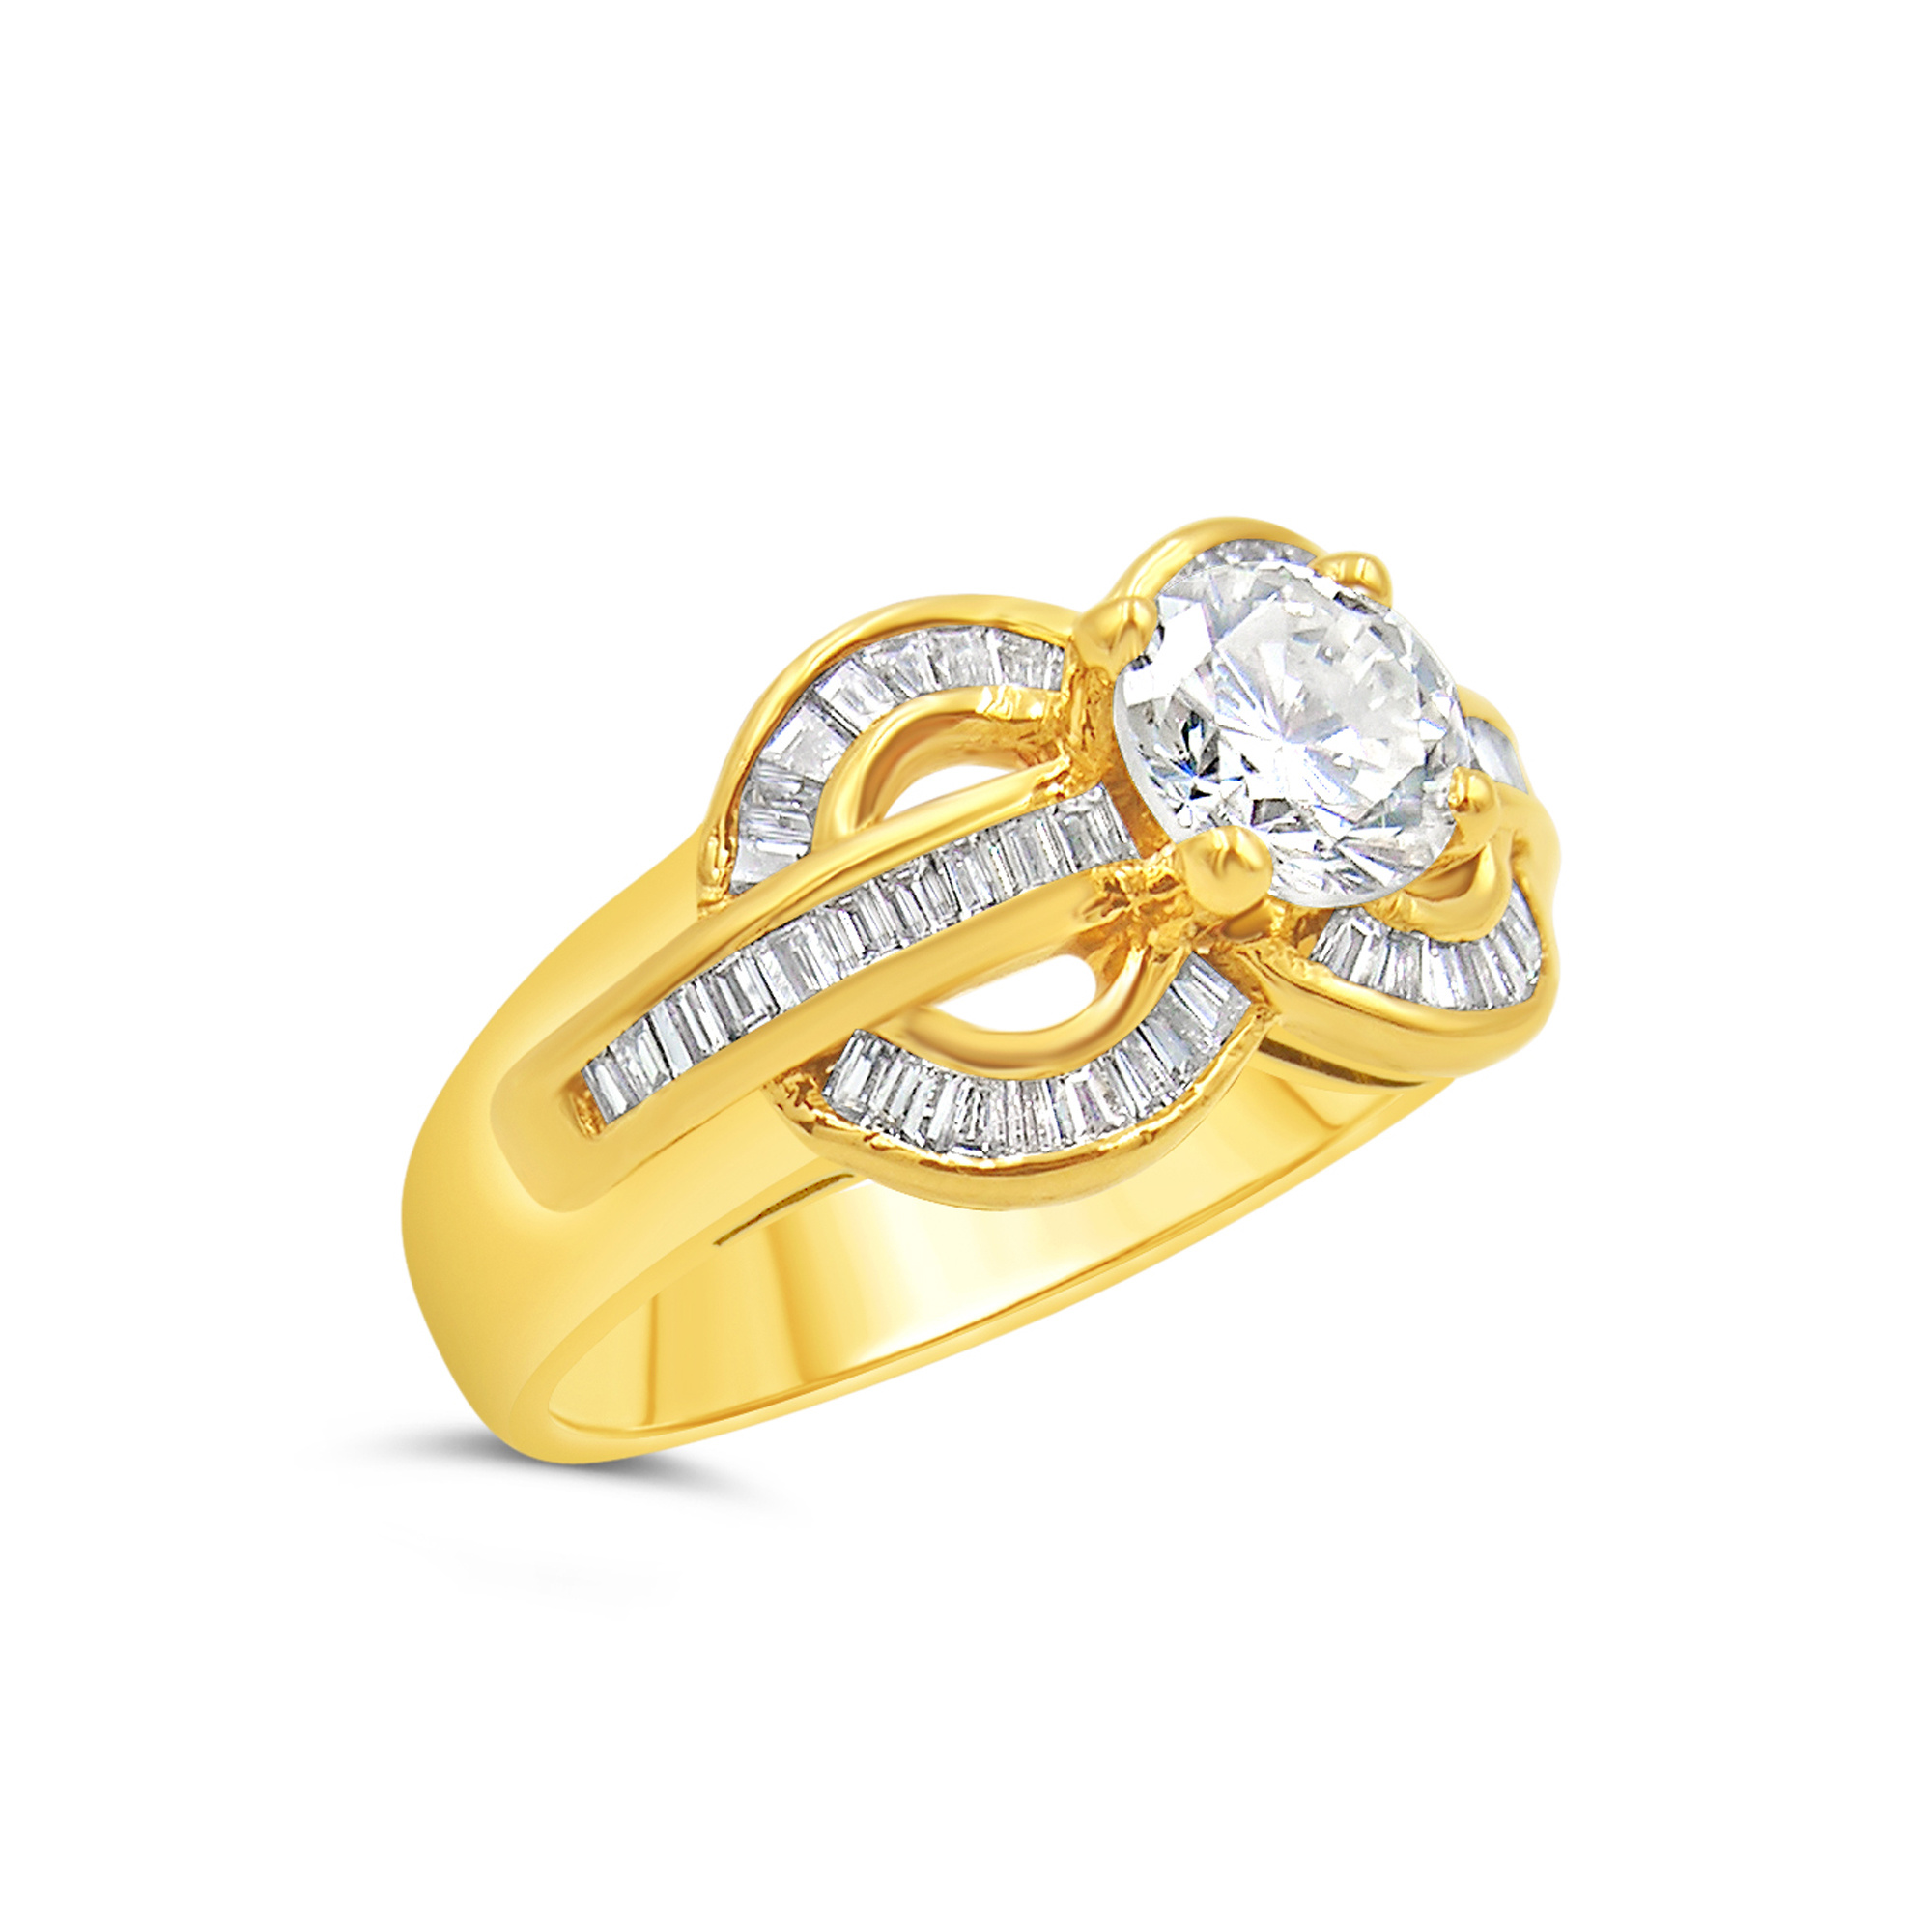 18kt yellow gold engagement ring with 1.62 ct diamonds